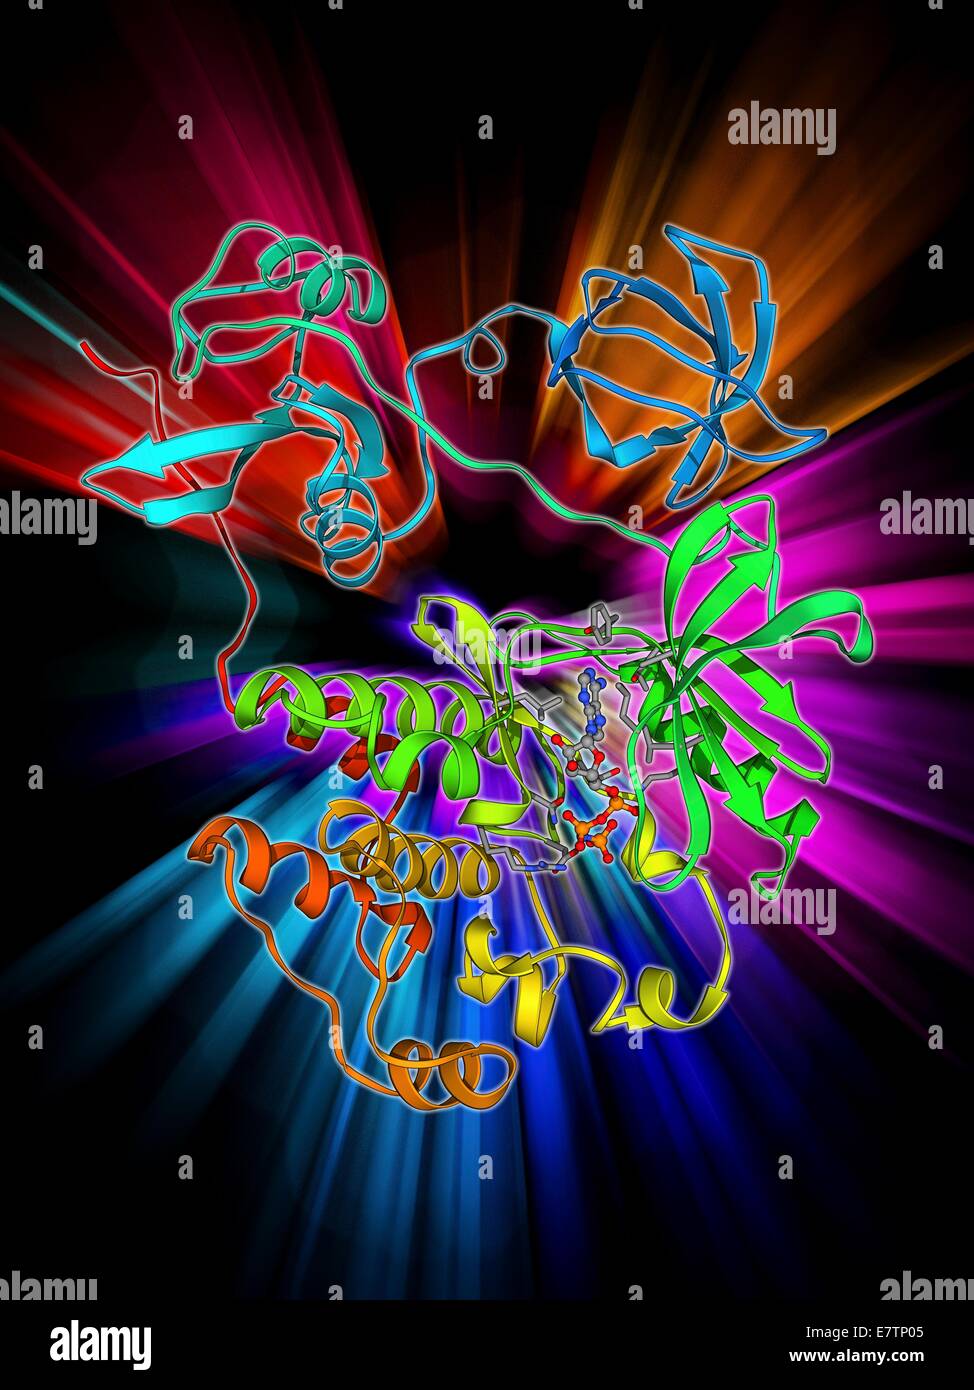 Src protein, molecular model. Src is a tyrosine kinase, a signalling protein in cells that has the ability to 'turn on' protein synthesis and cellular growth. Stock Photo